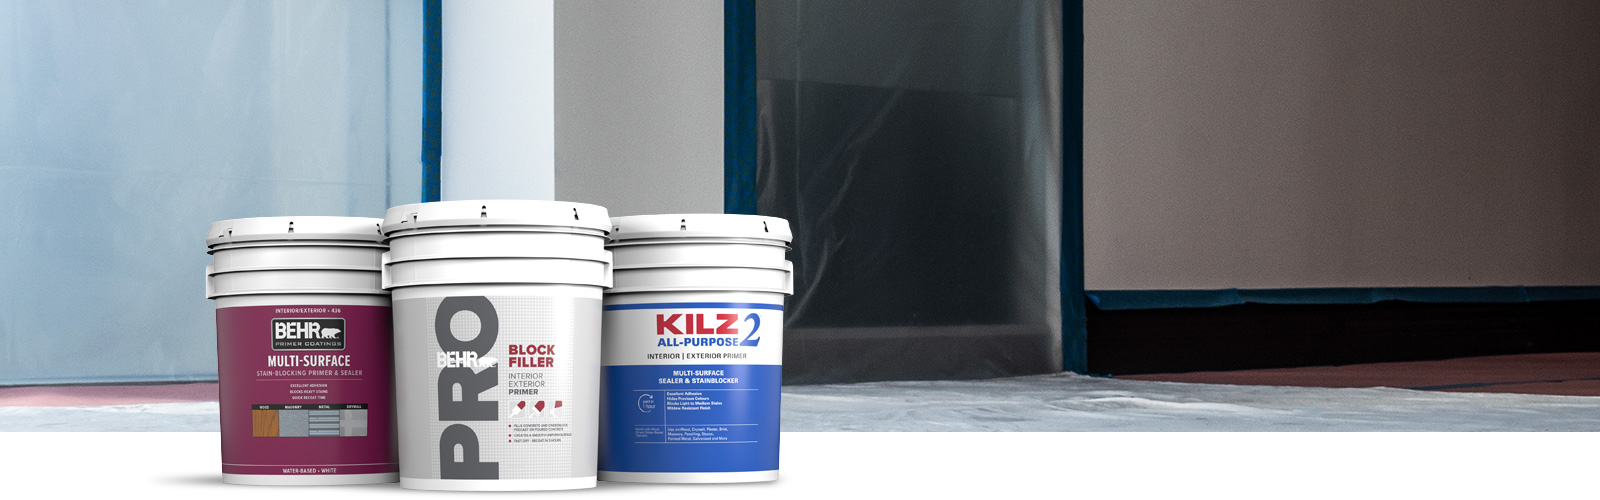 Behr Pro exterior primer products landing page desktop image featuring 5 gallon cans.